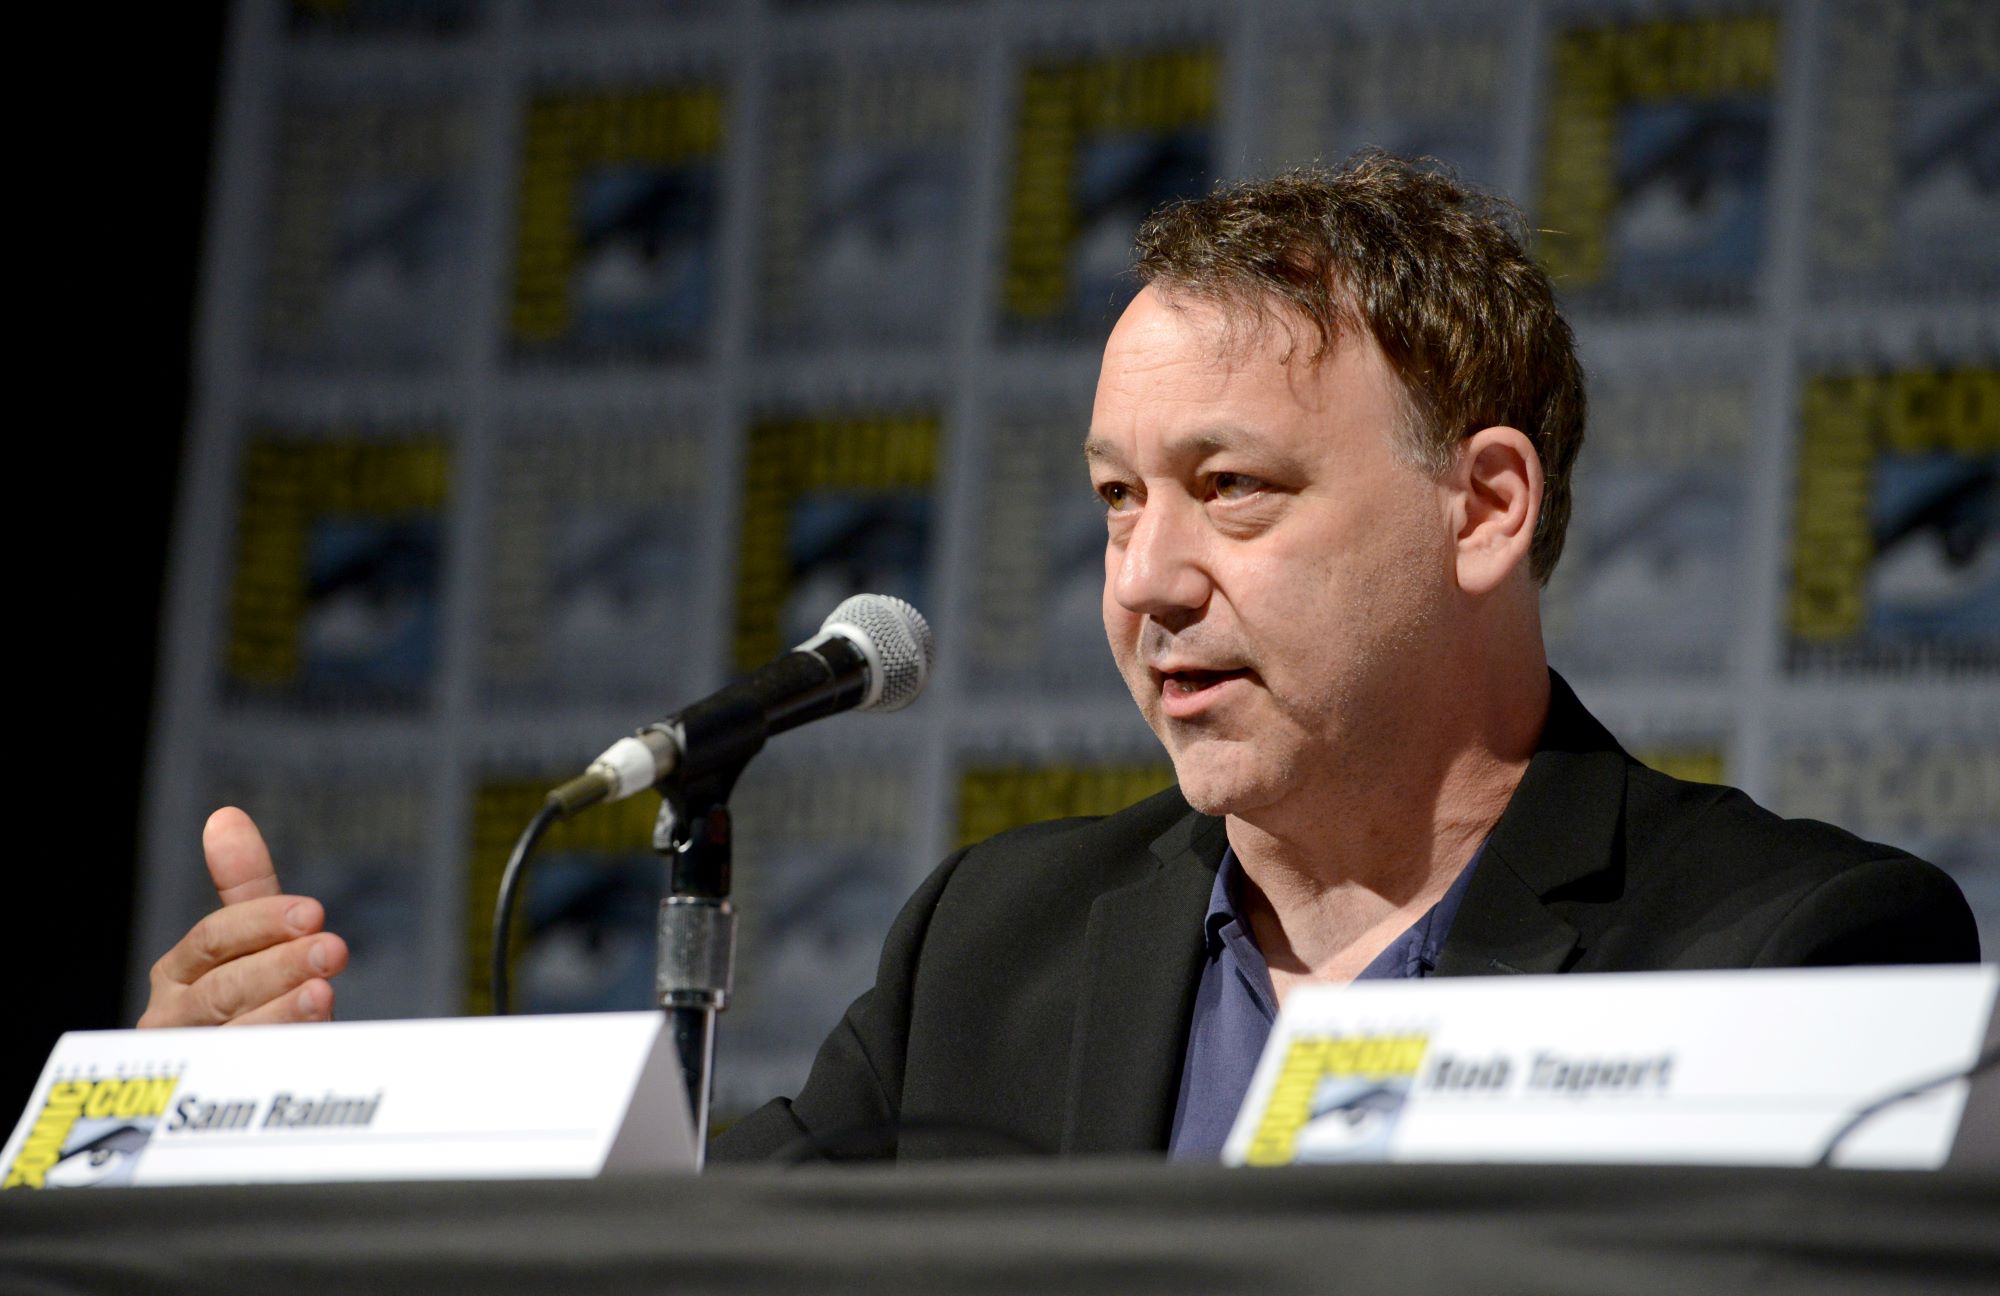 'Doctor Strange 2' director Sam Raimi wears a black suit over a blue button-up shirt while speaking onstage at a Comic Con panel.